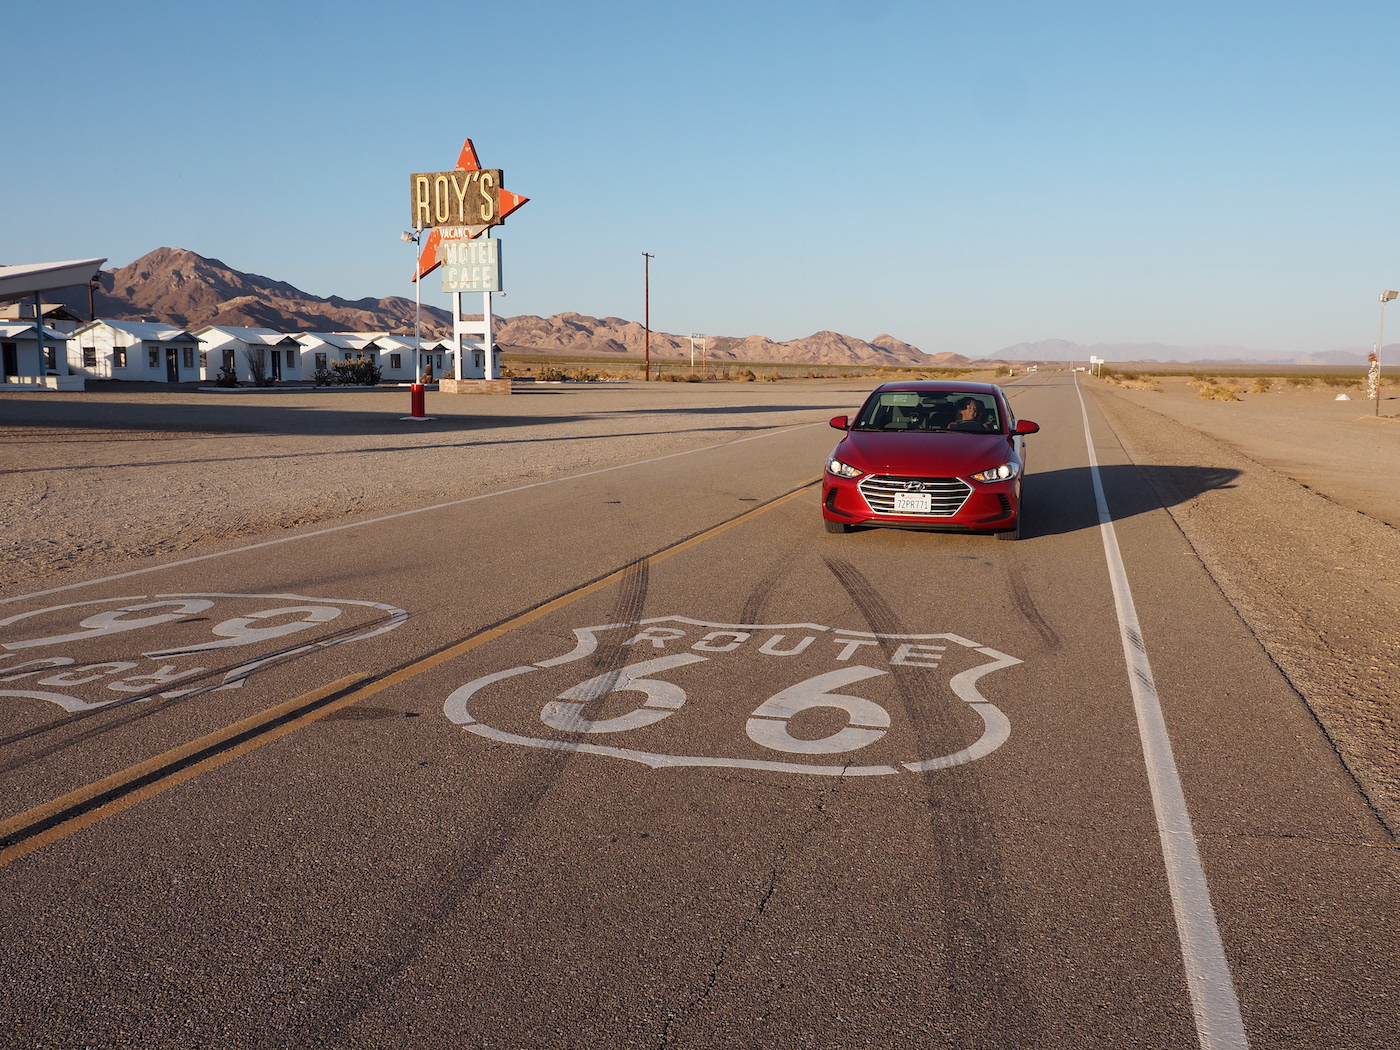 Mojave woestijn route 66 roy's